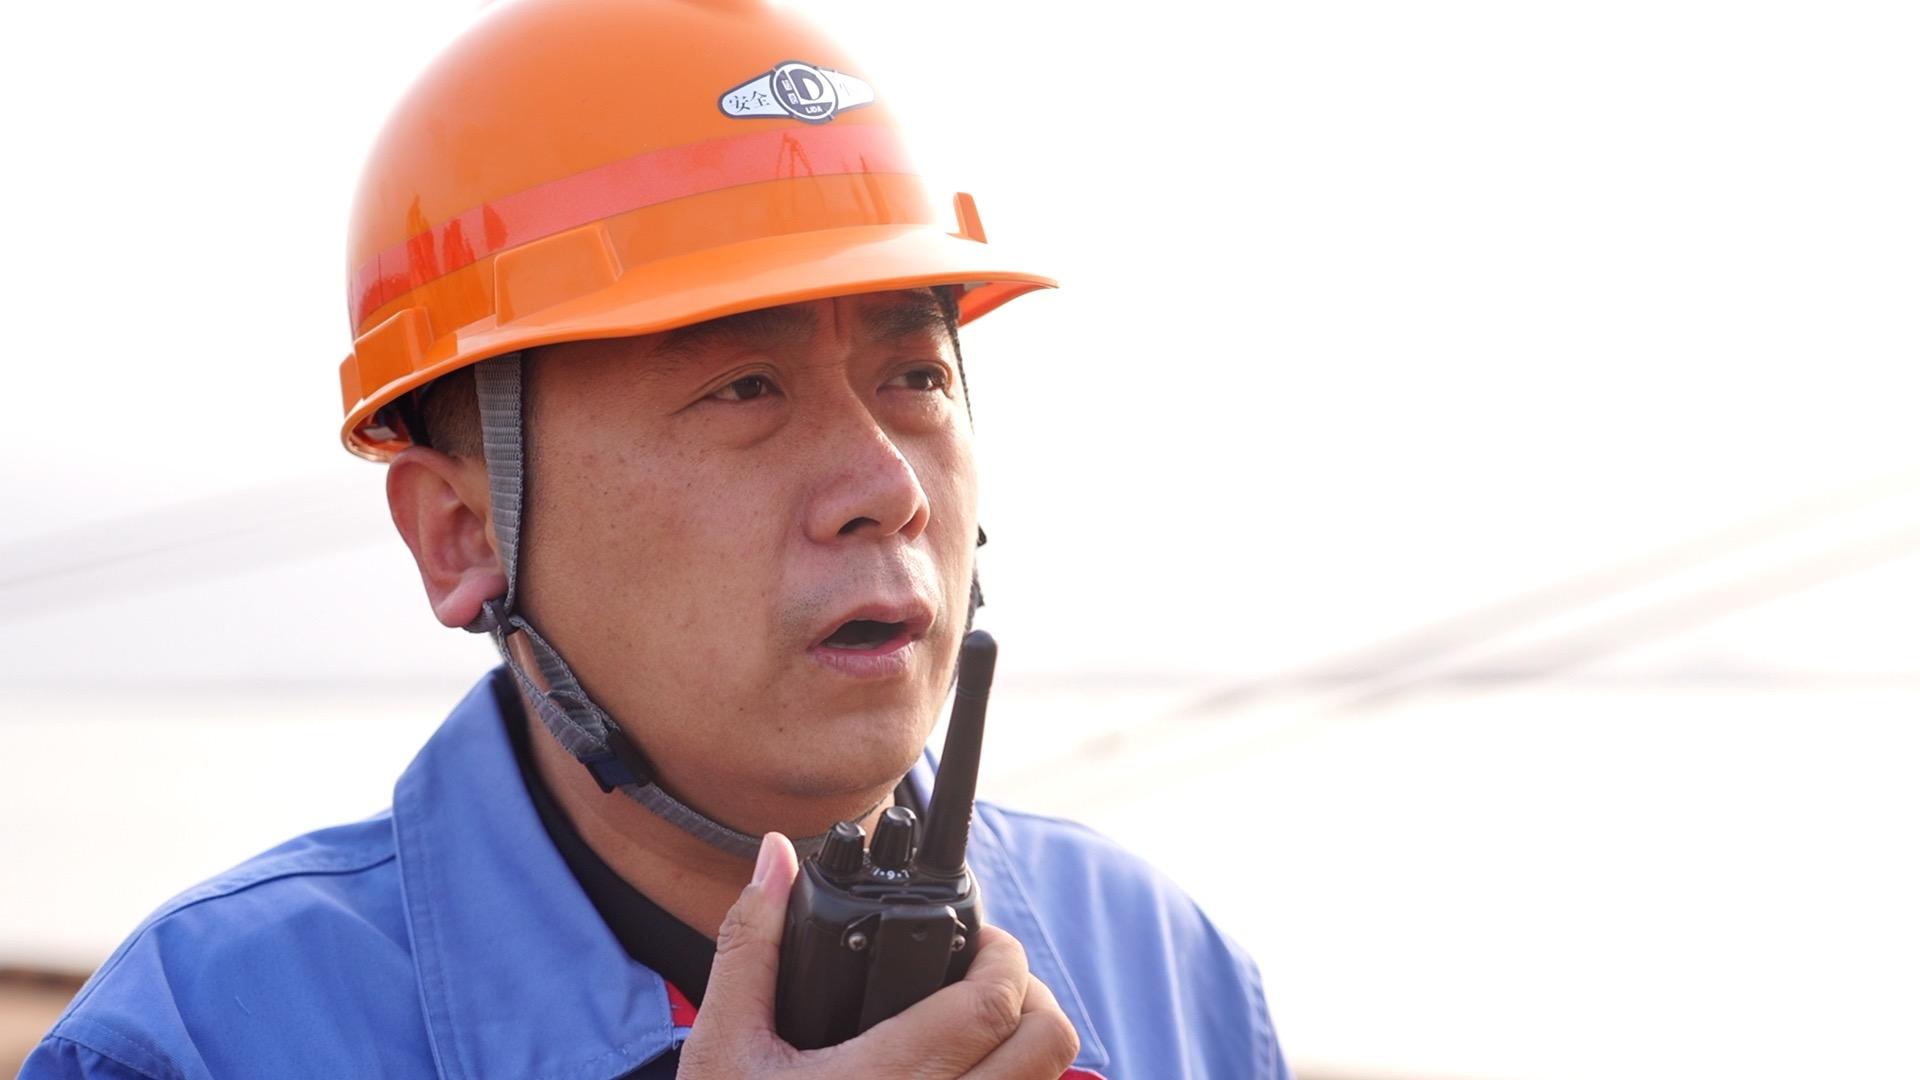 For 20 years, Zhao Wei has worked at the port of Jinzhou, Liaoning Province, China. As the port's business expanded, so did his ascent up the career ladder. /CGTN